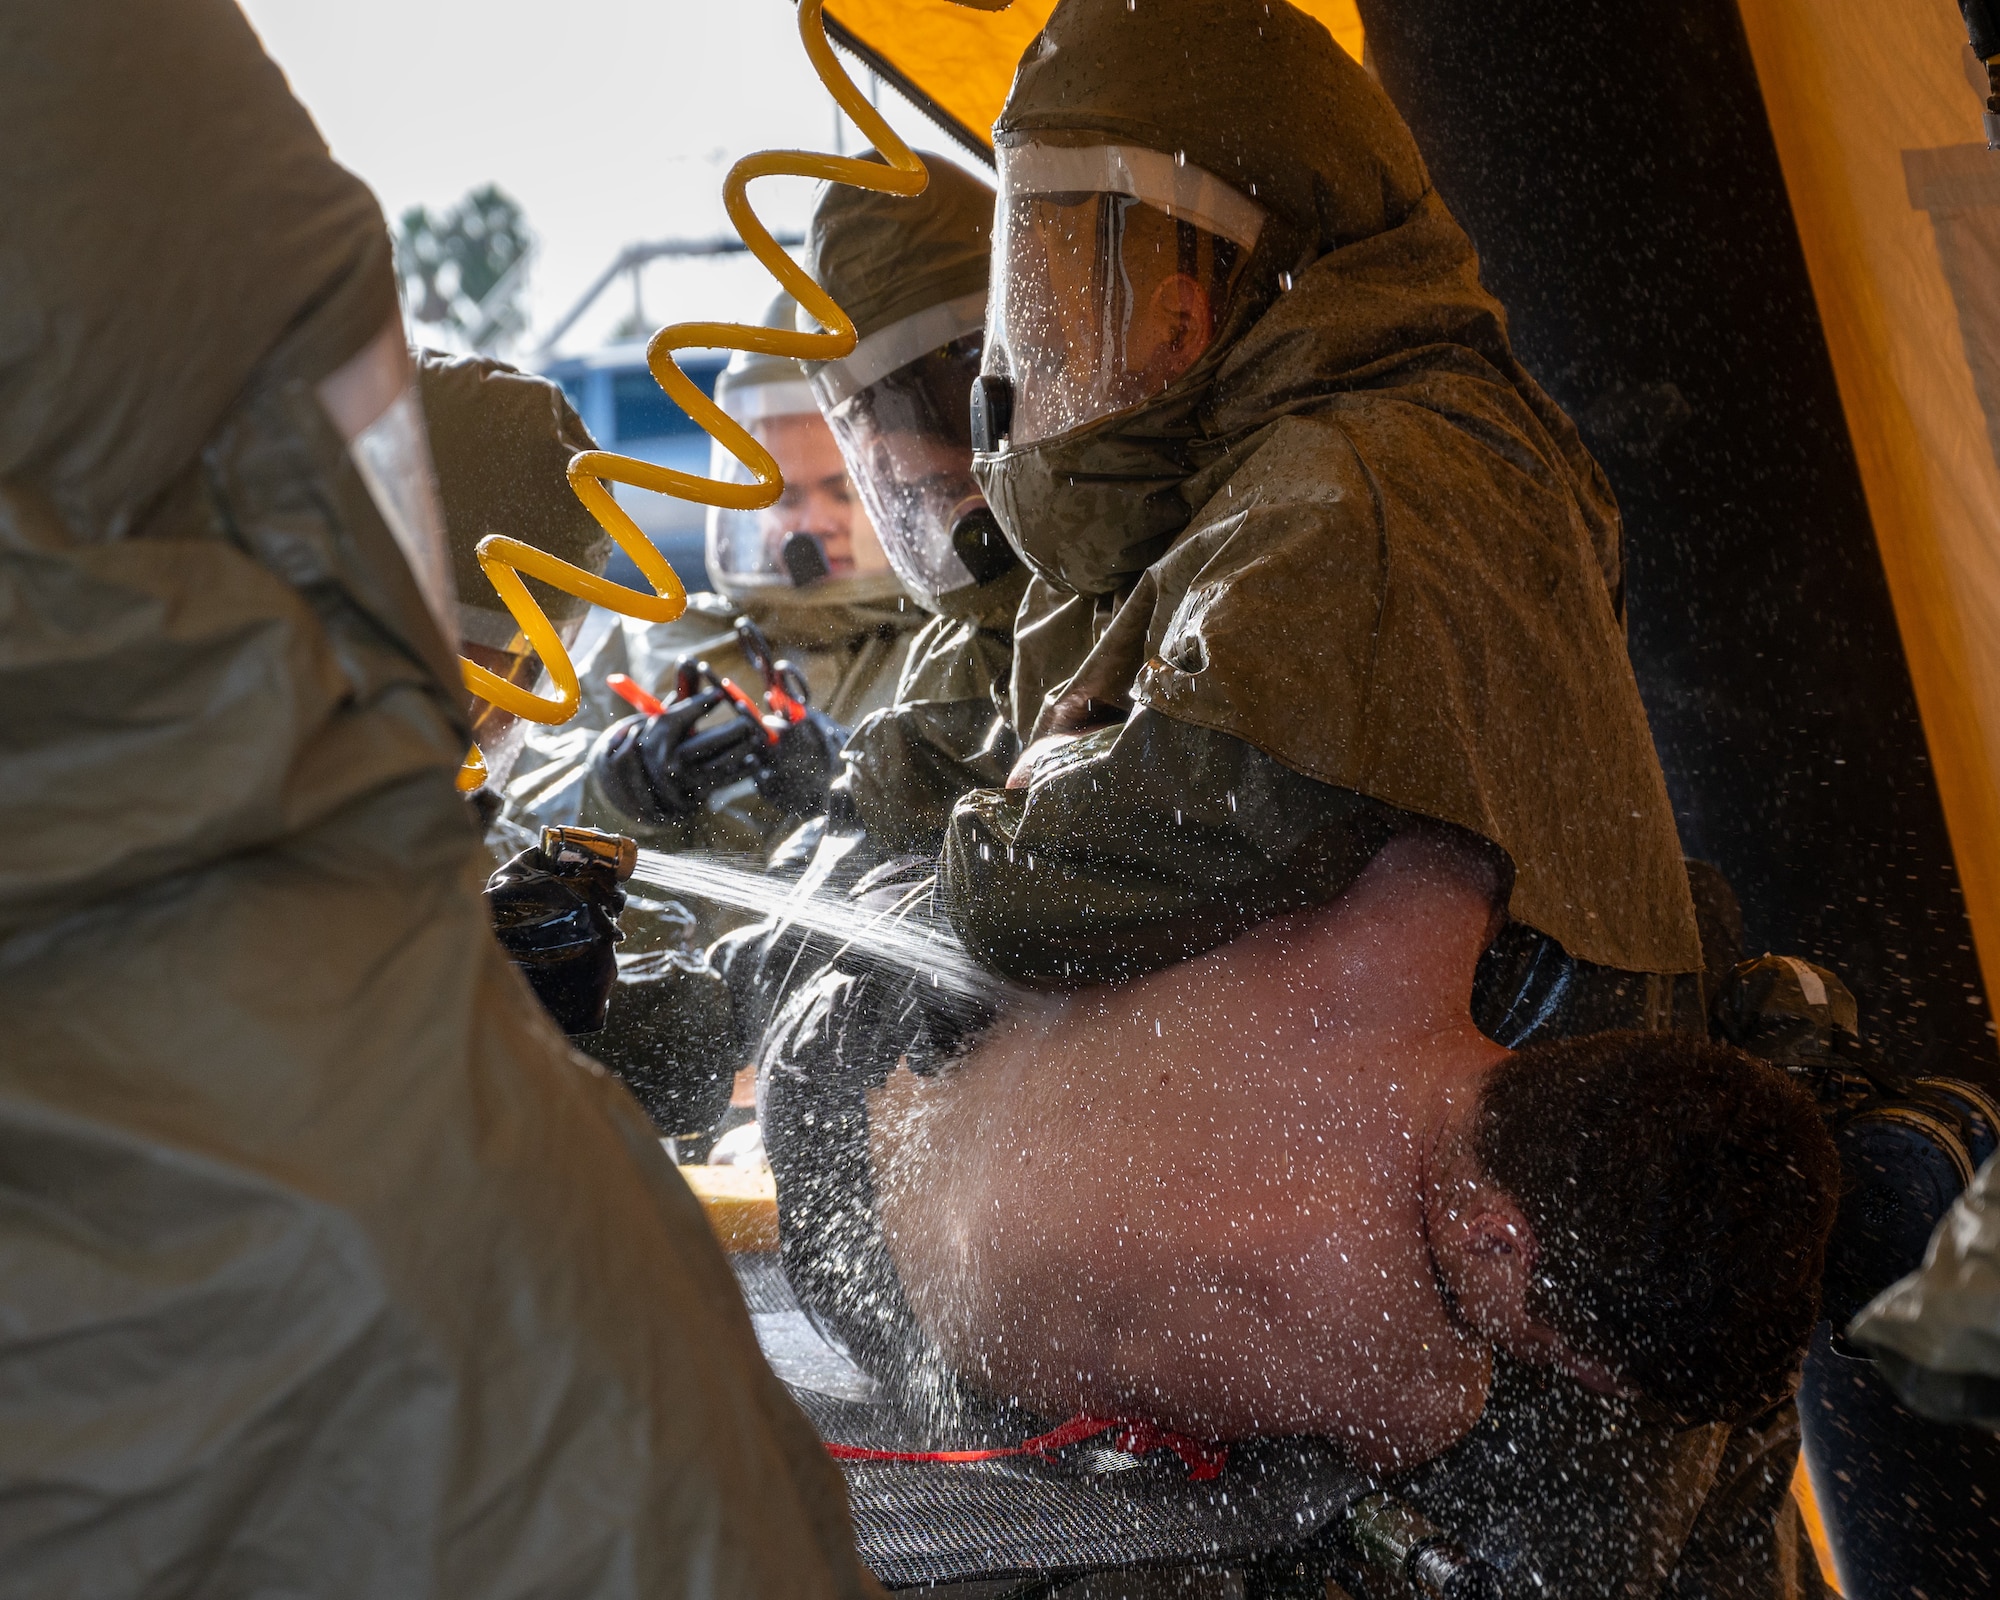 U.S. Air Force Airmen from the 47th Medical Group decontaminate a patient during exercise Ready Eagle II at Laughlin Air Force Base, Texas, Jan. 31, 2024. Exercise Ready Eagle II allowed Airmen to sharpen their response procedures, patient care skills, and increase service member survivability. Decontamination allows Airmen to clean off chemicals before moving them into the medical group for further treatment. (U.S. Air Force photo by Staff Sgt. Nicholas Larsen)